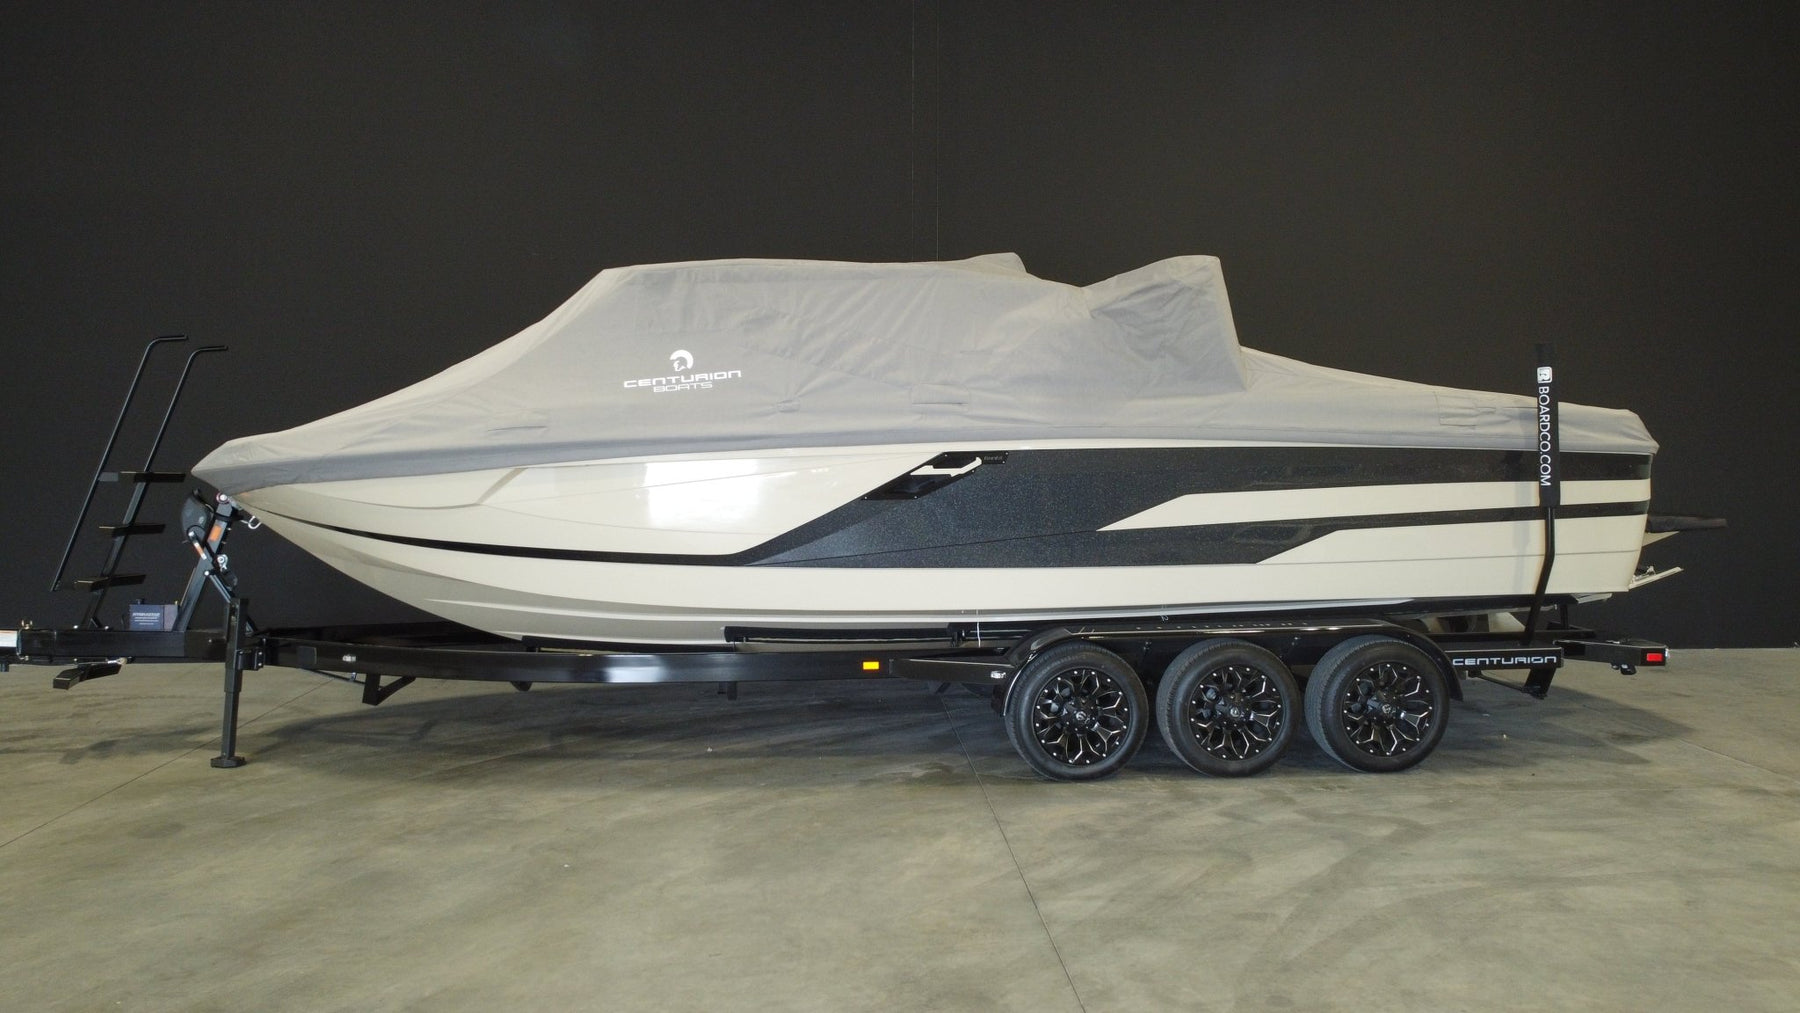 Centurion RI265 with Predator Power Tower and Roswell Bimini TD Ratchet Cover - BoardCo